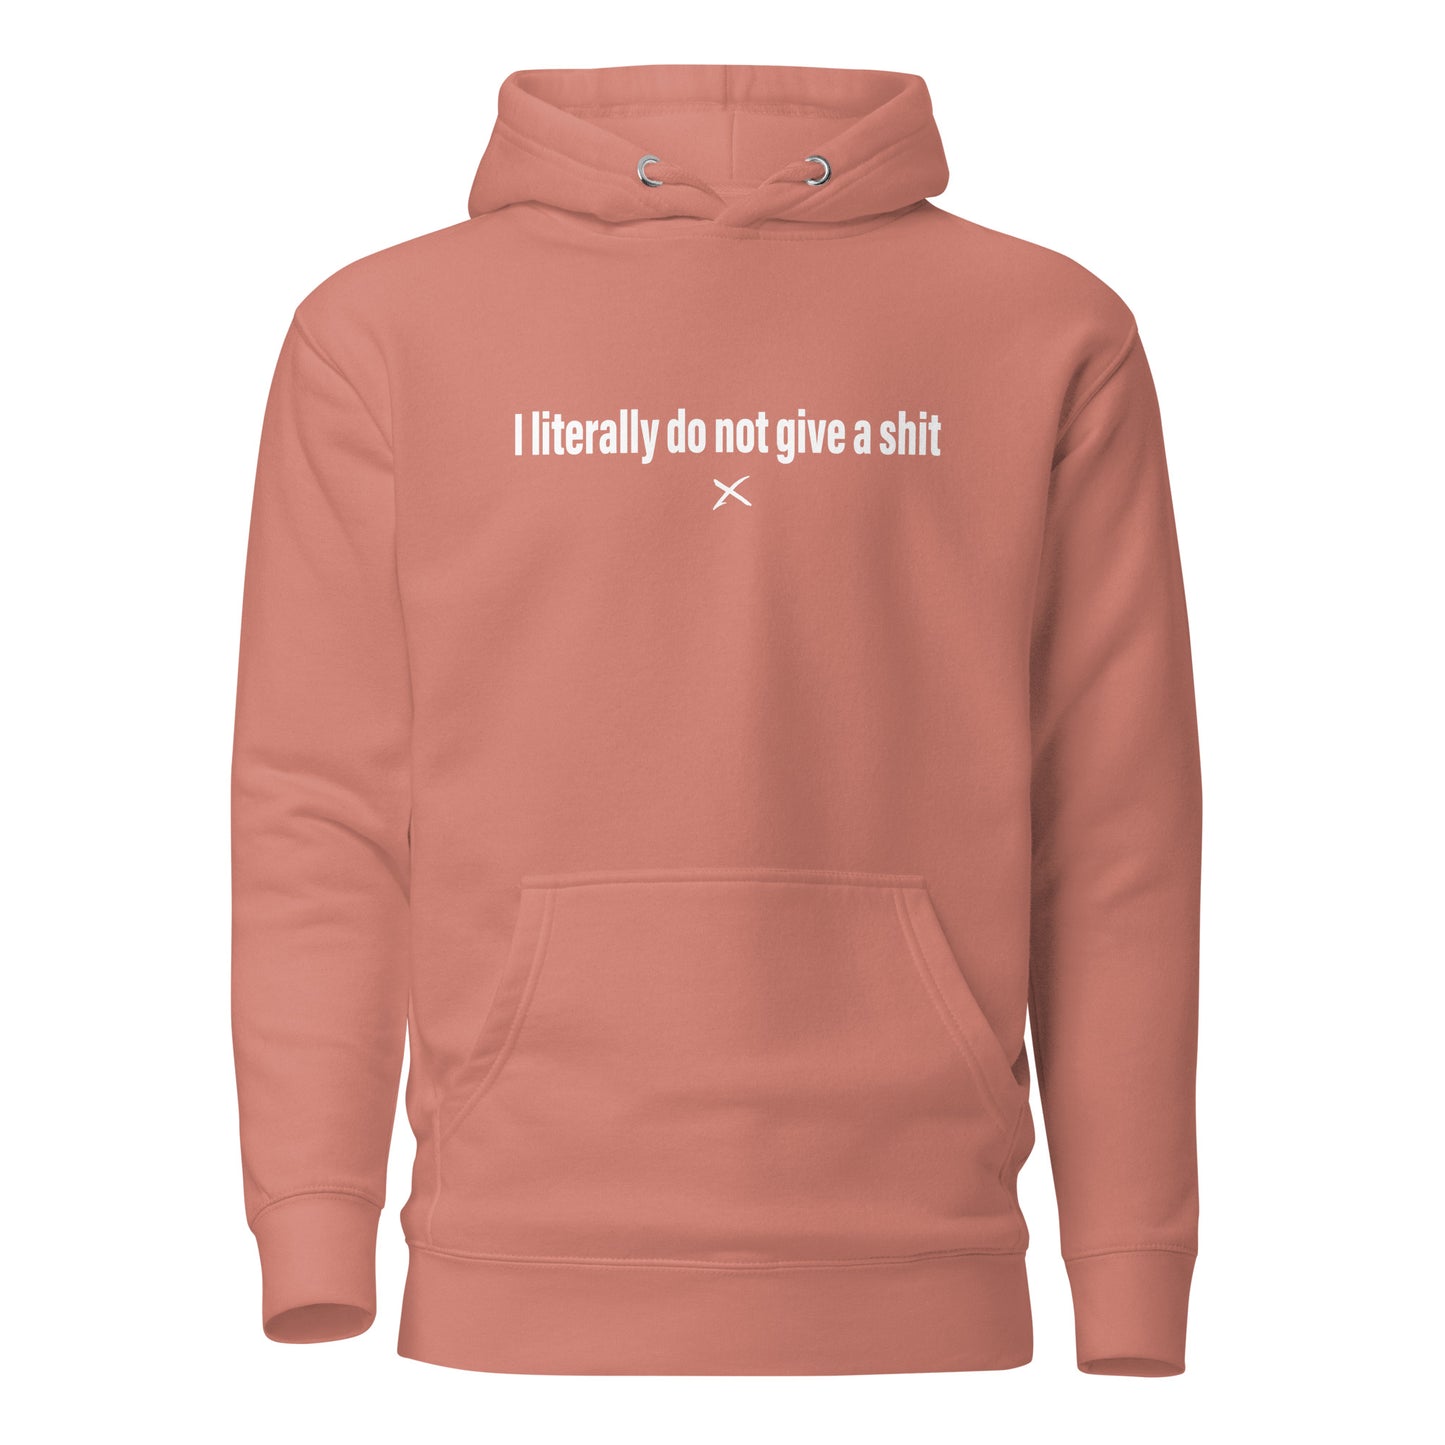 I literally do not give a shit - Hoodie